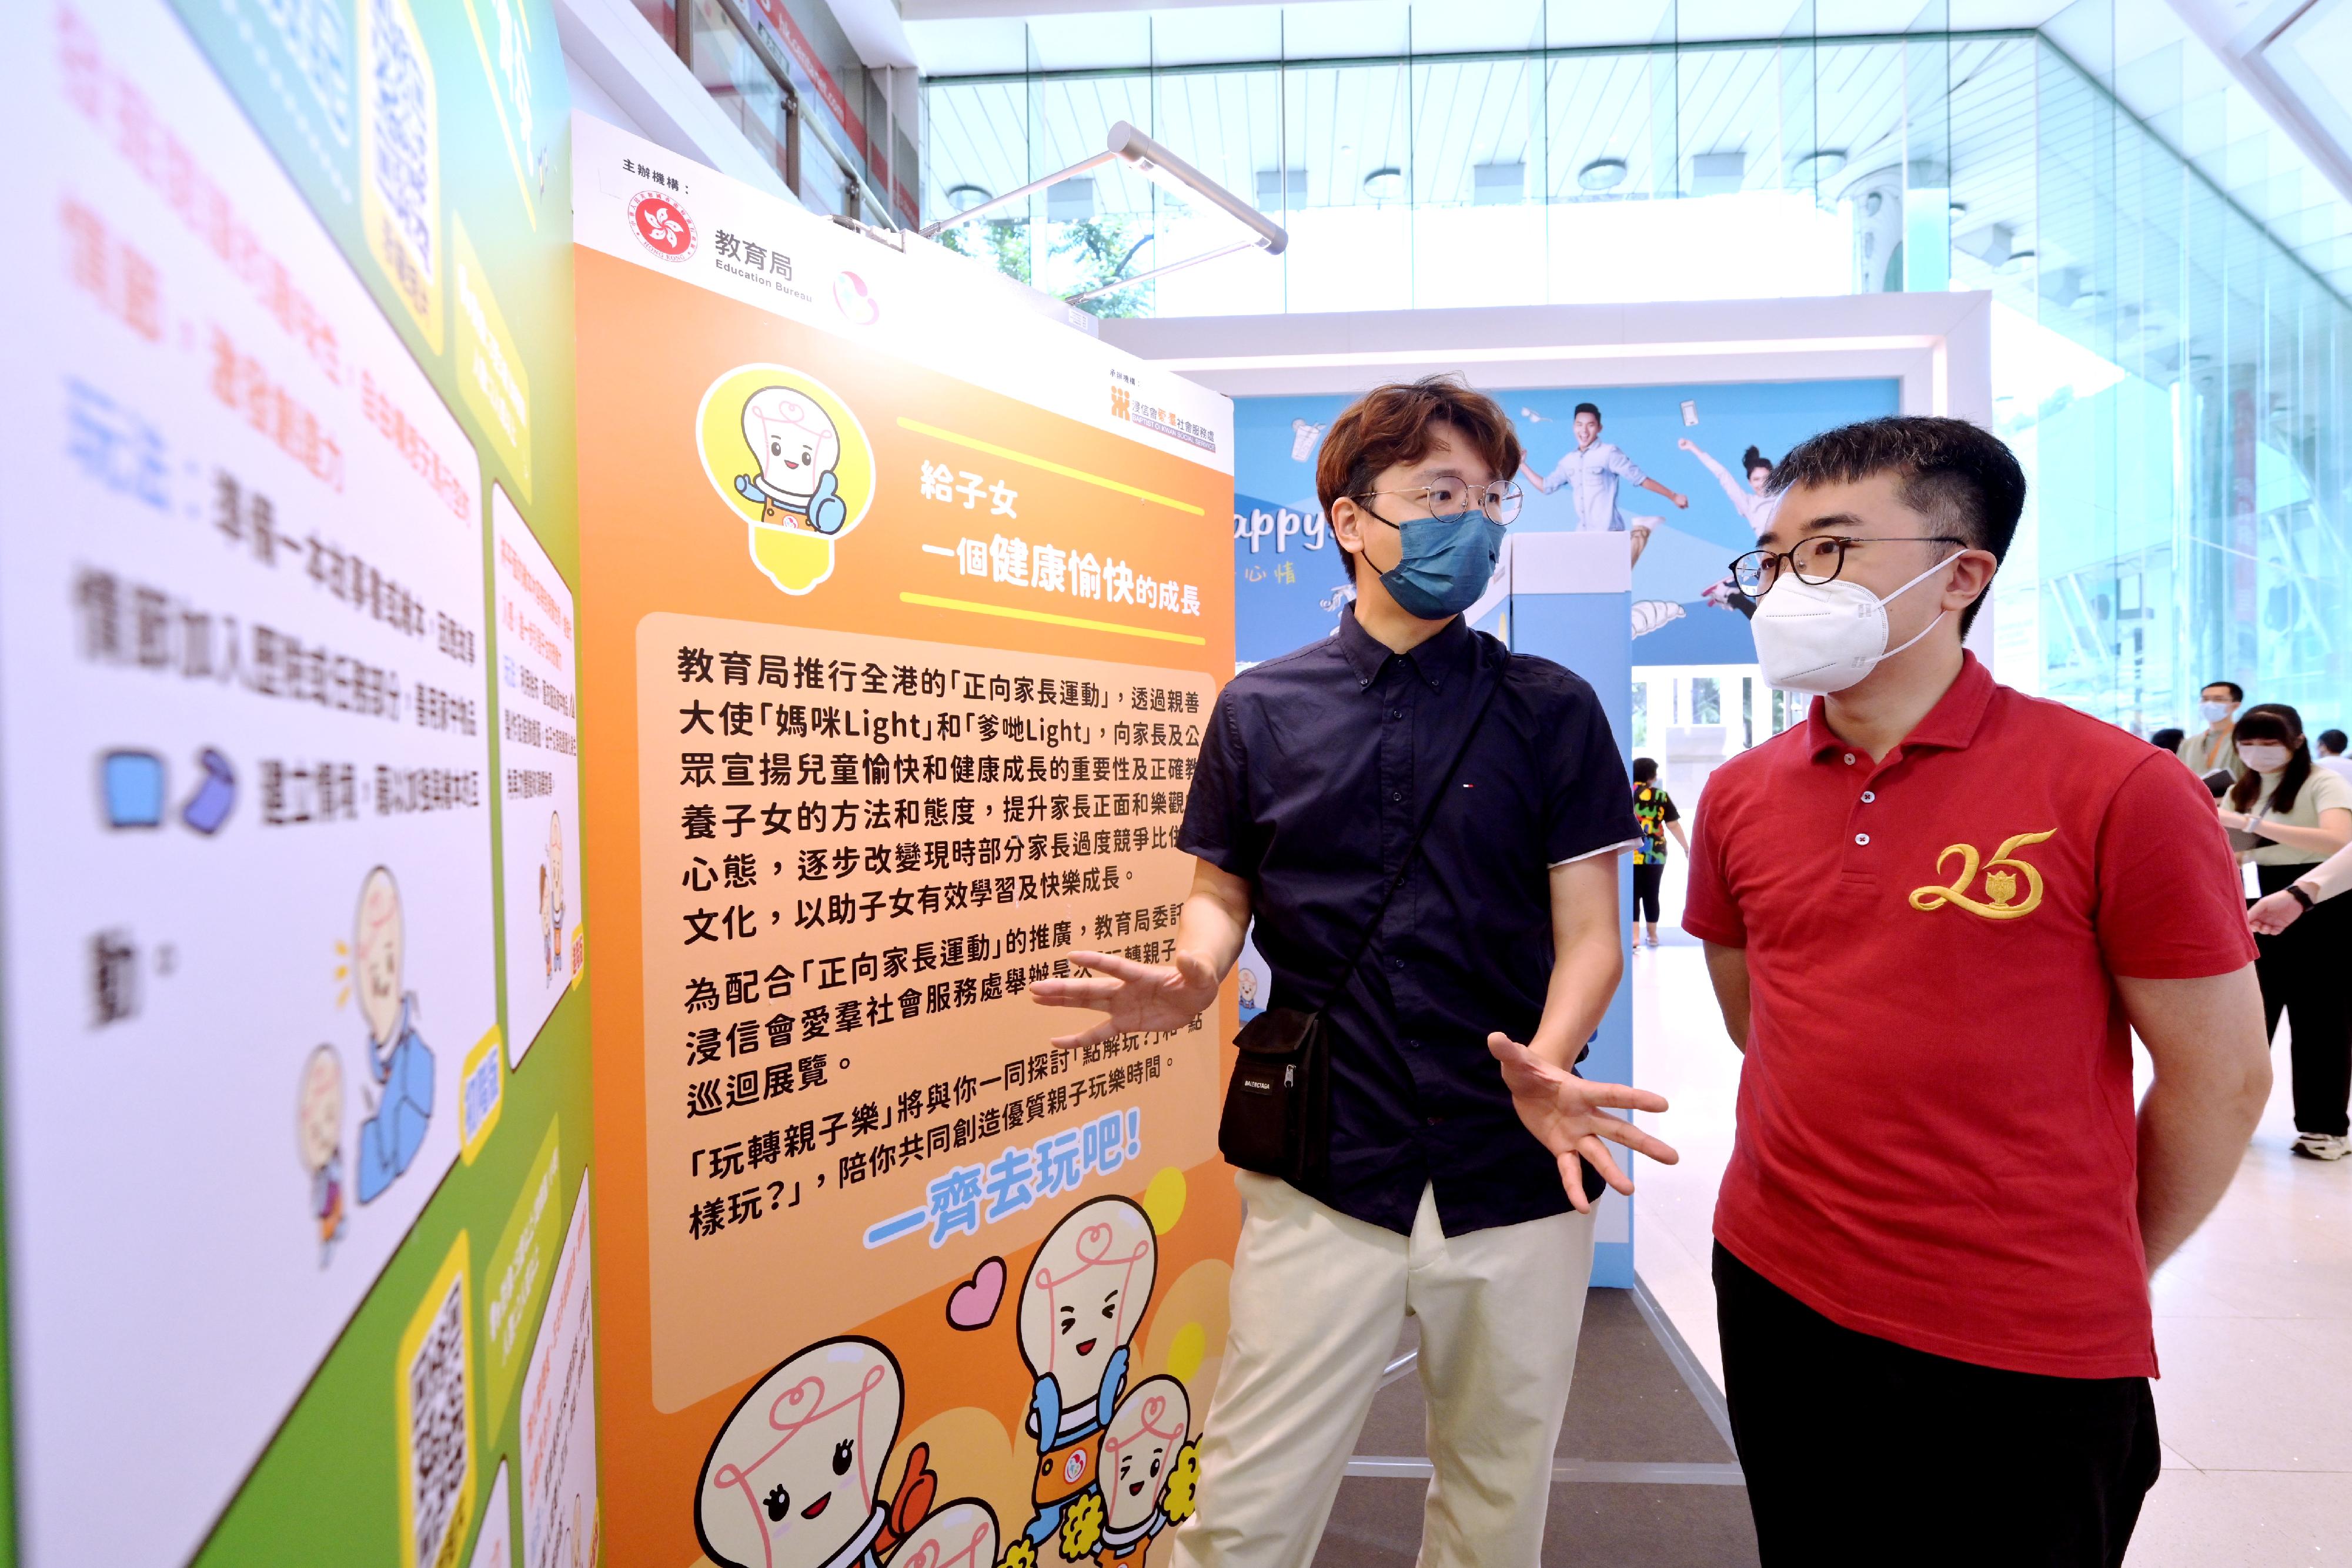 The Under Secretary for Education, Mr Sze Chun-fai, toured the "Playtime with Children" Roving Exhibition held by the Education Bureau at Sheung Shui Centre today (August 21). Photo shows Mr Sze (right) viewing the exhibition panels.